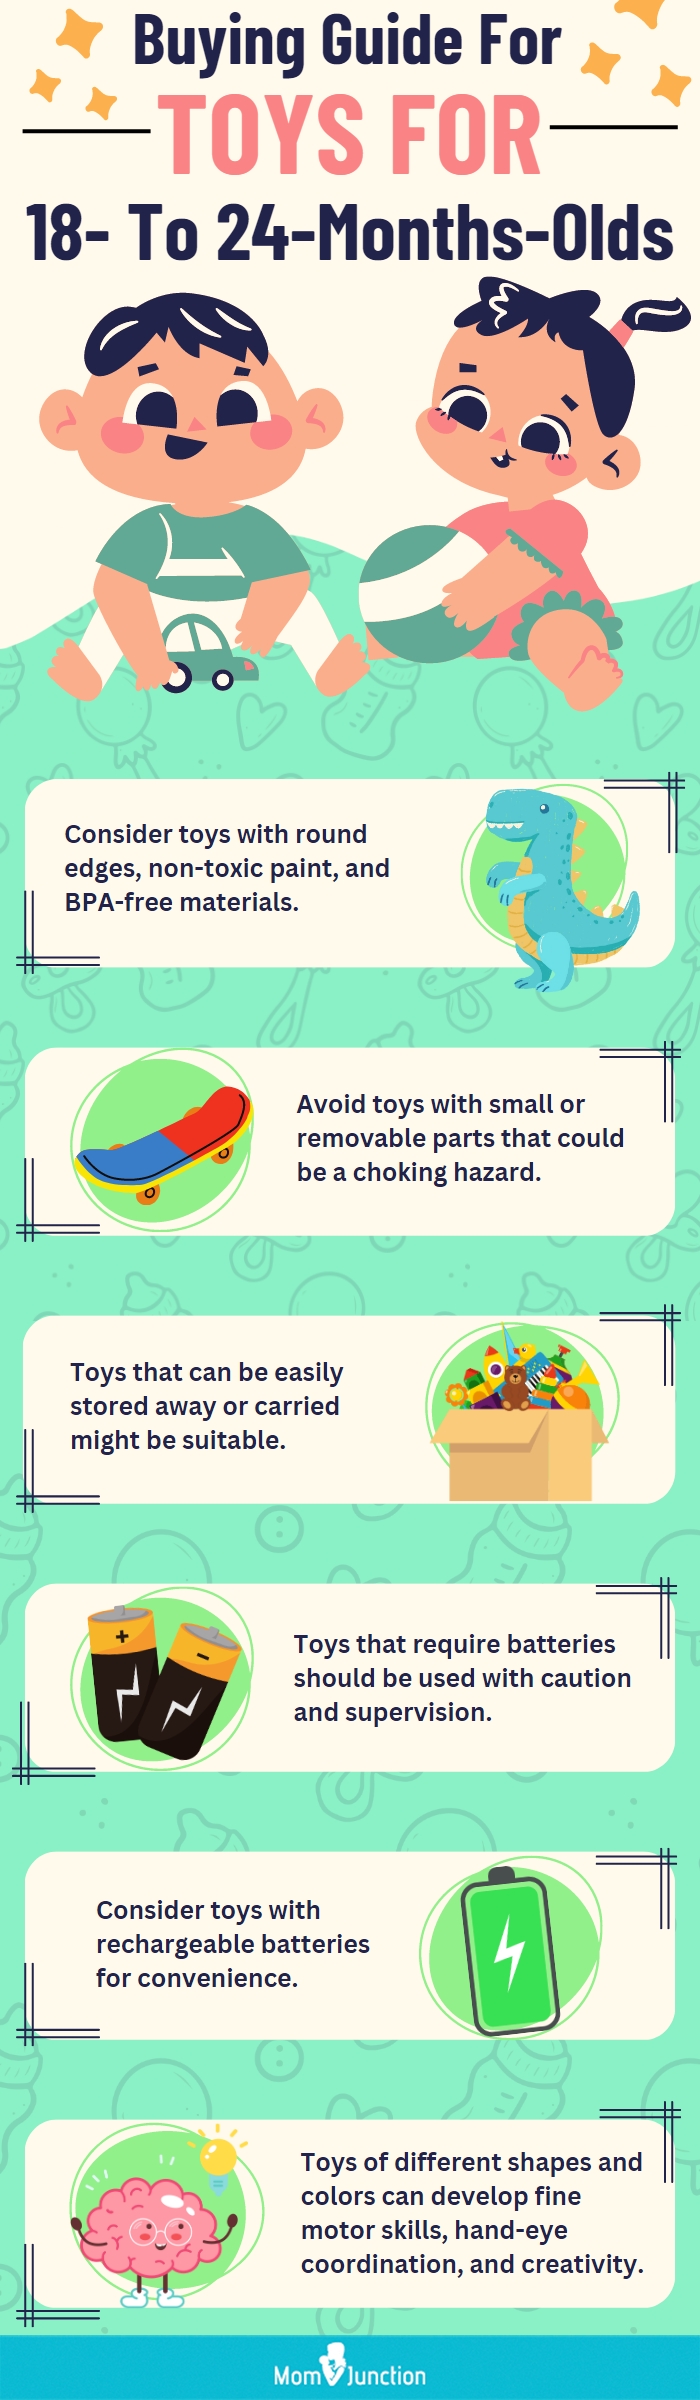 Buying Guide For Toys For 18- To 24-Months-Olds (infographic)